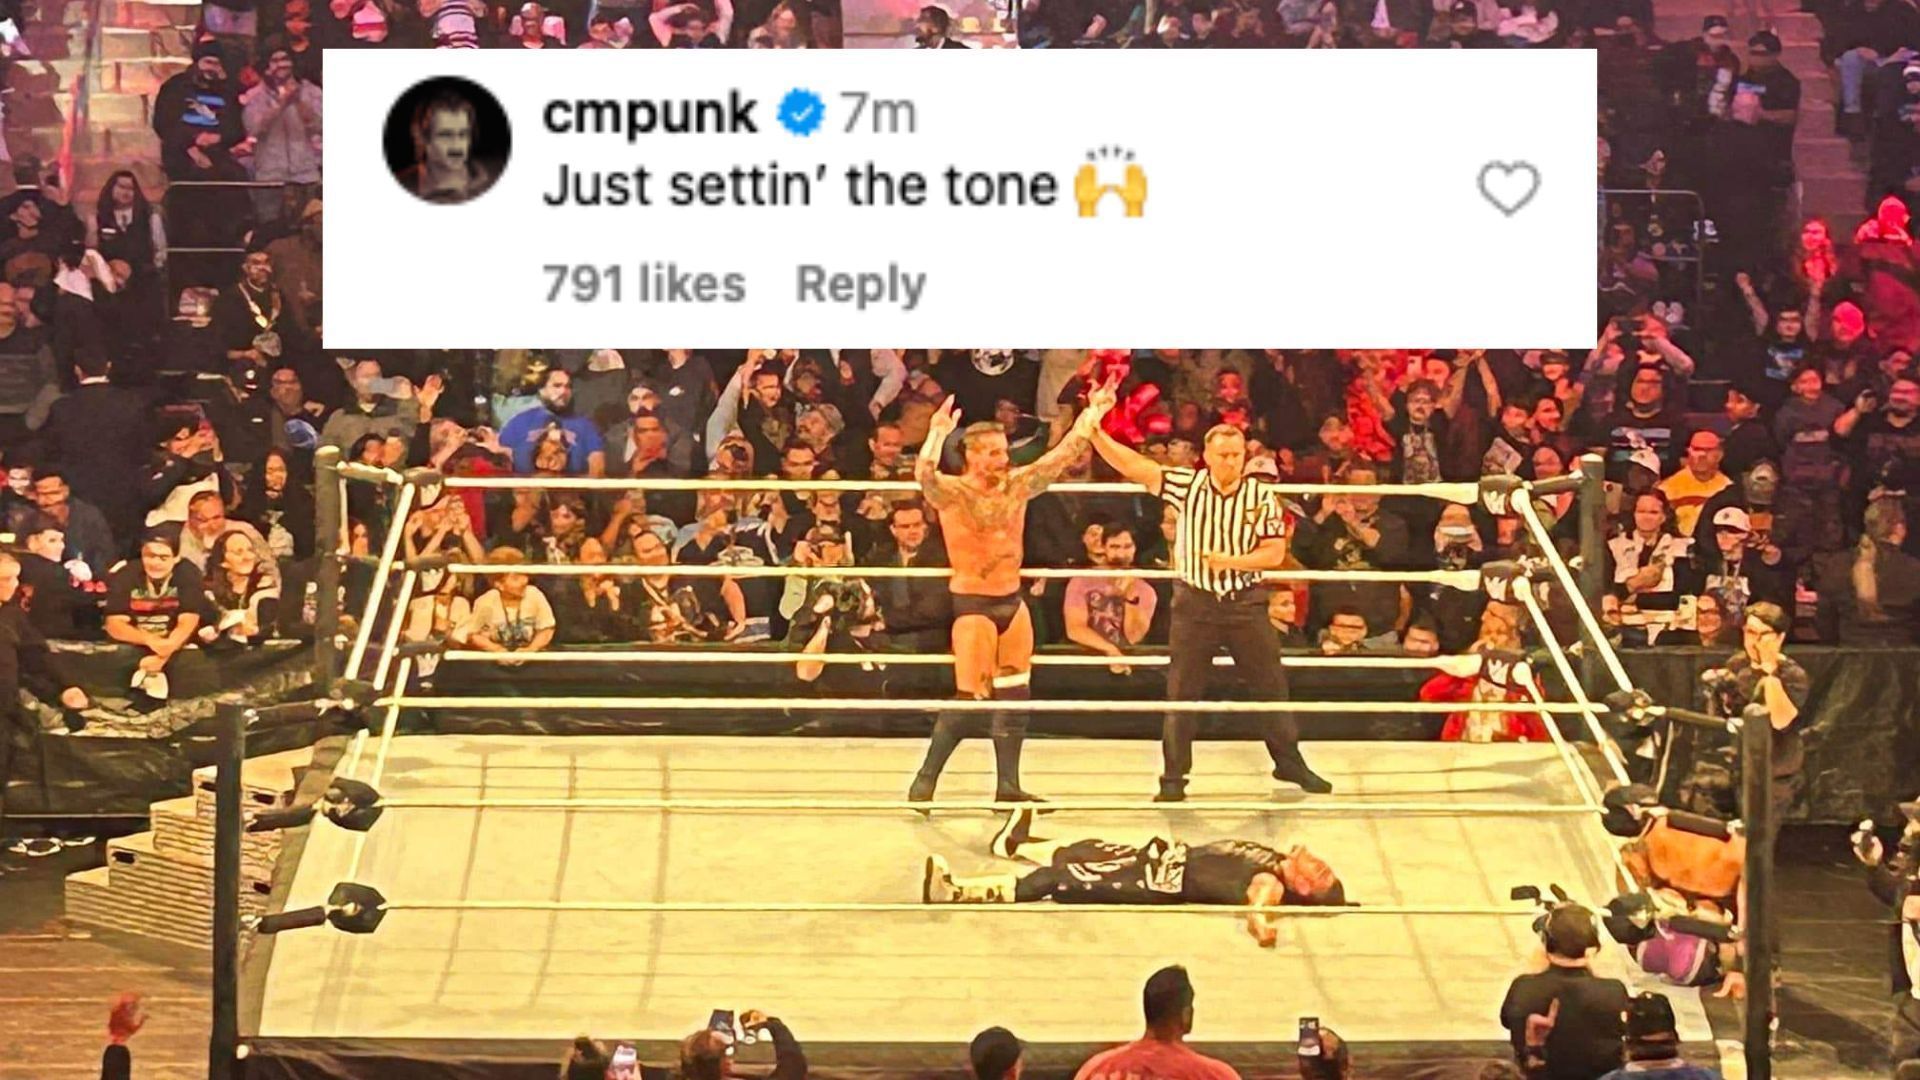 Punk leaves an interesting comment on Instagram.